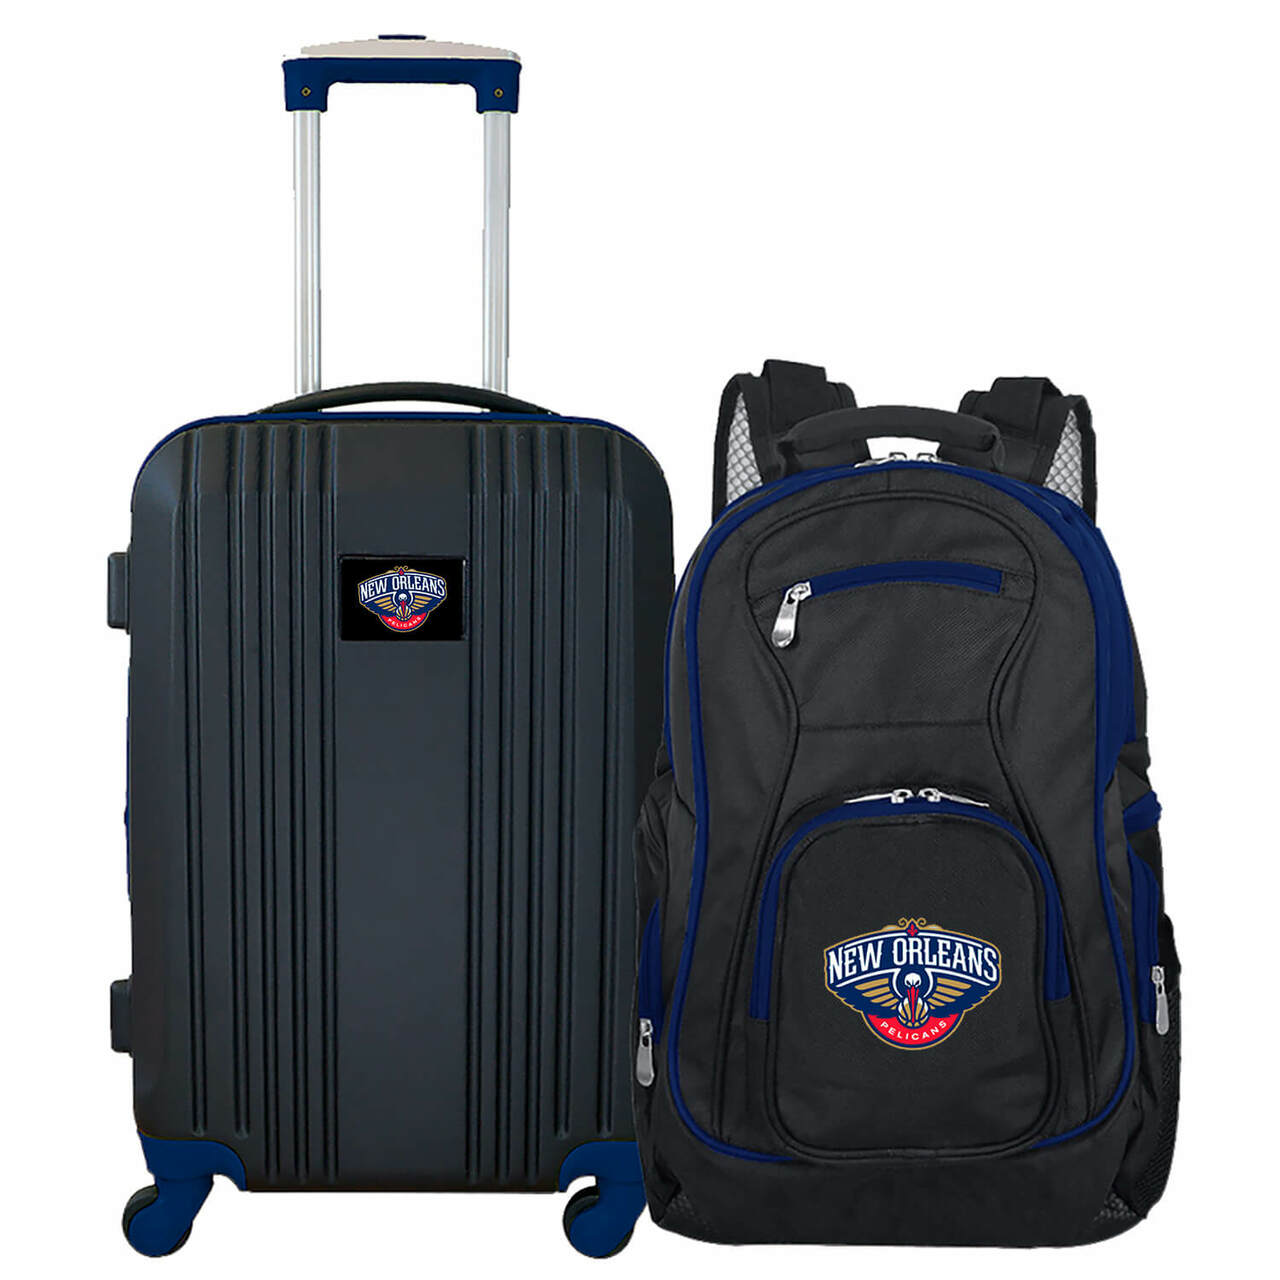 New Orleans Pelicans 2 Piece Premium Colored Trim Backpack and Luggage Set